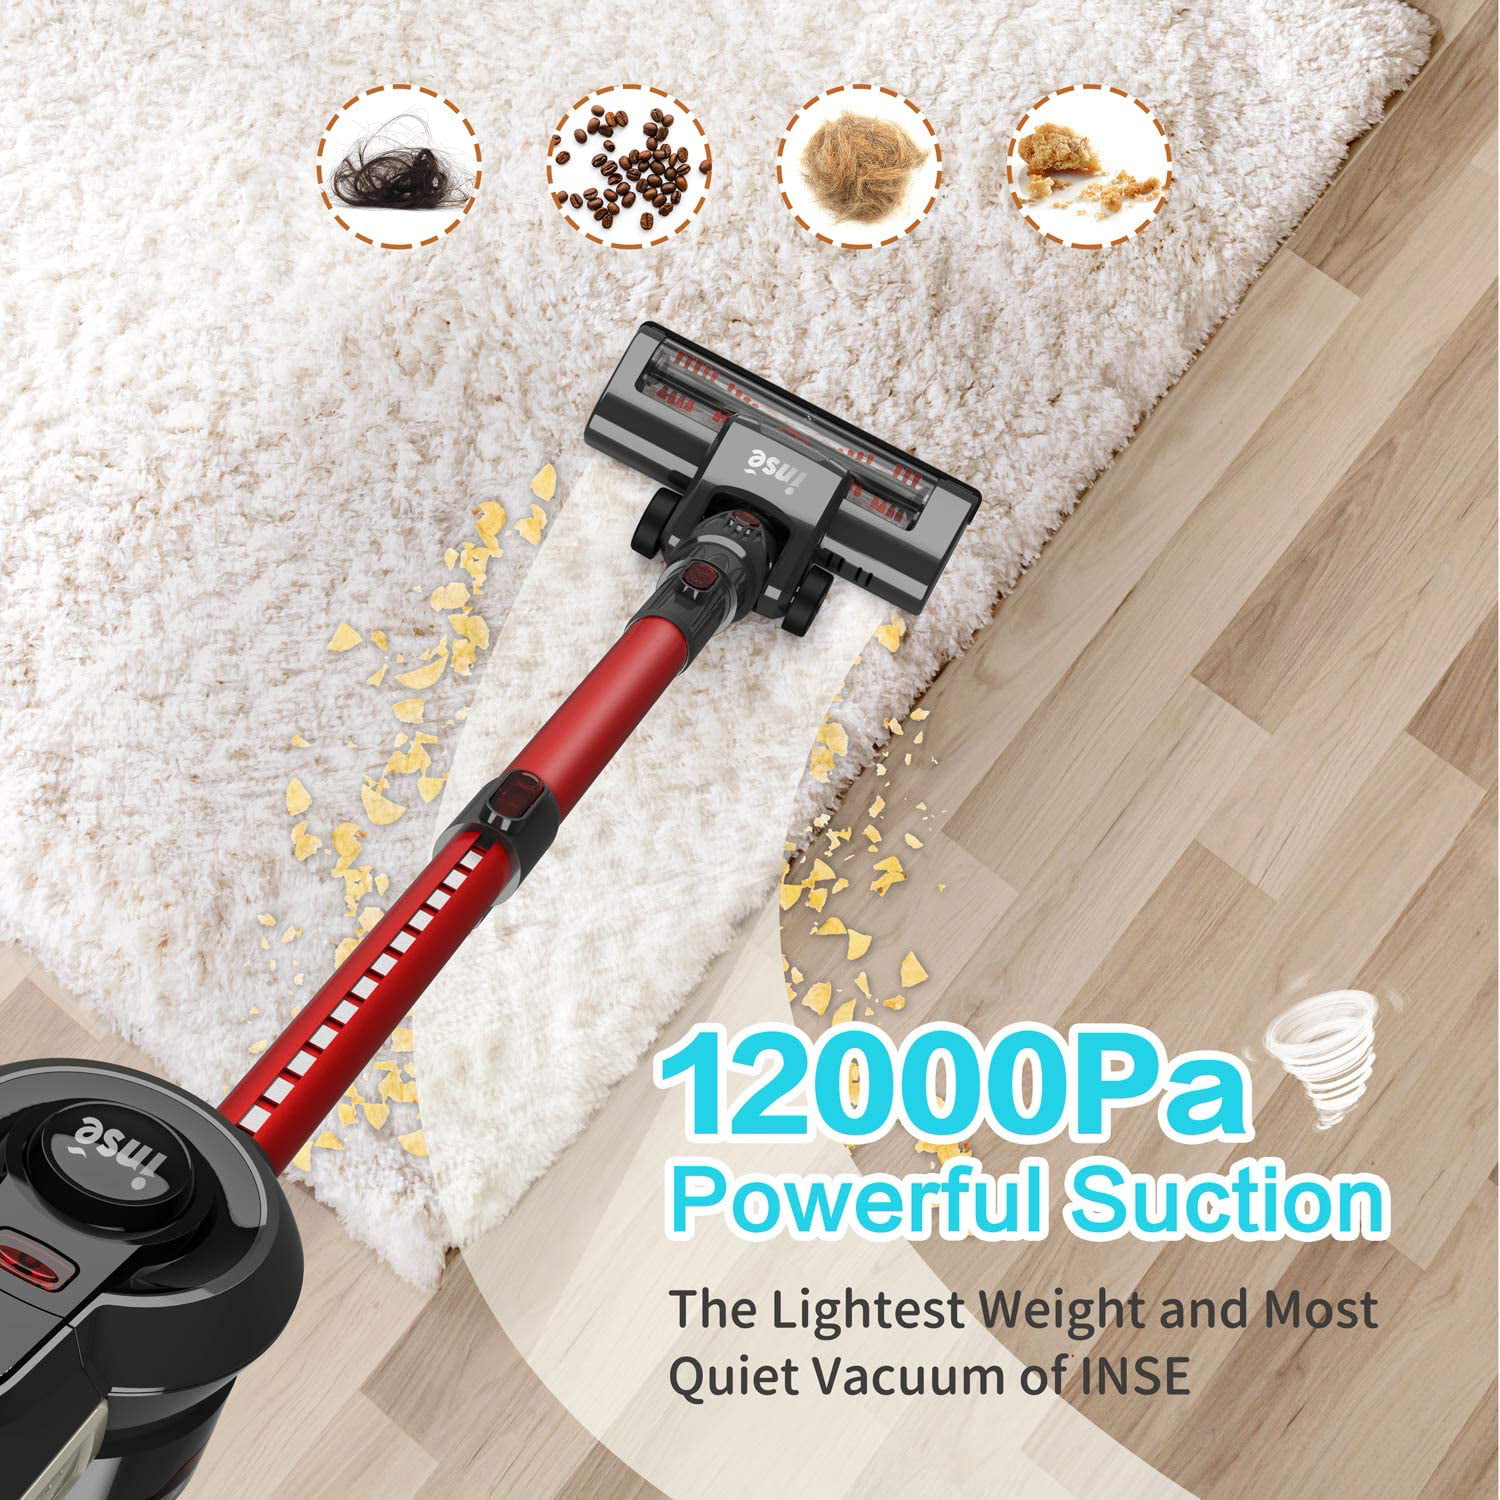 Cordless Vacuum Cleaner Handy and Extendable, Lightweight Quiet 